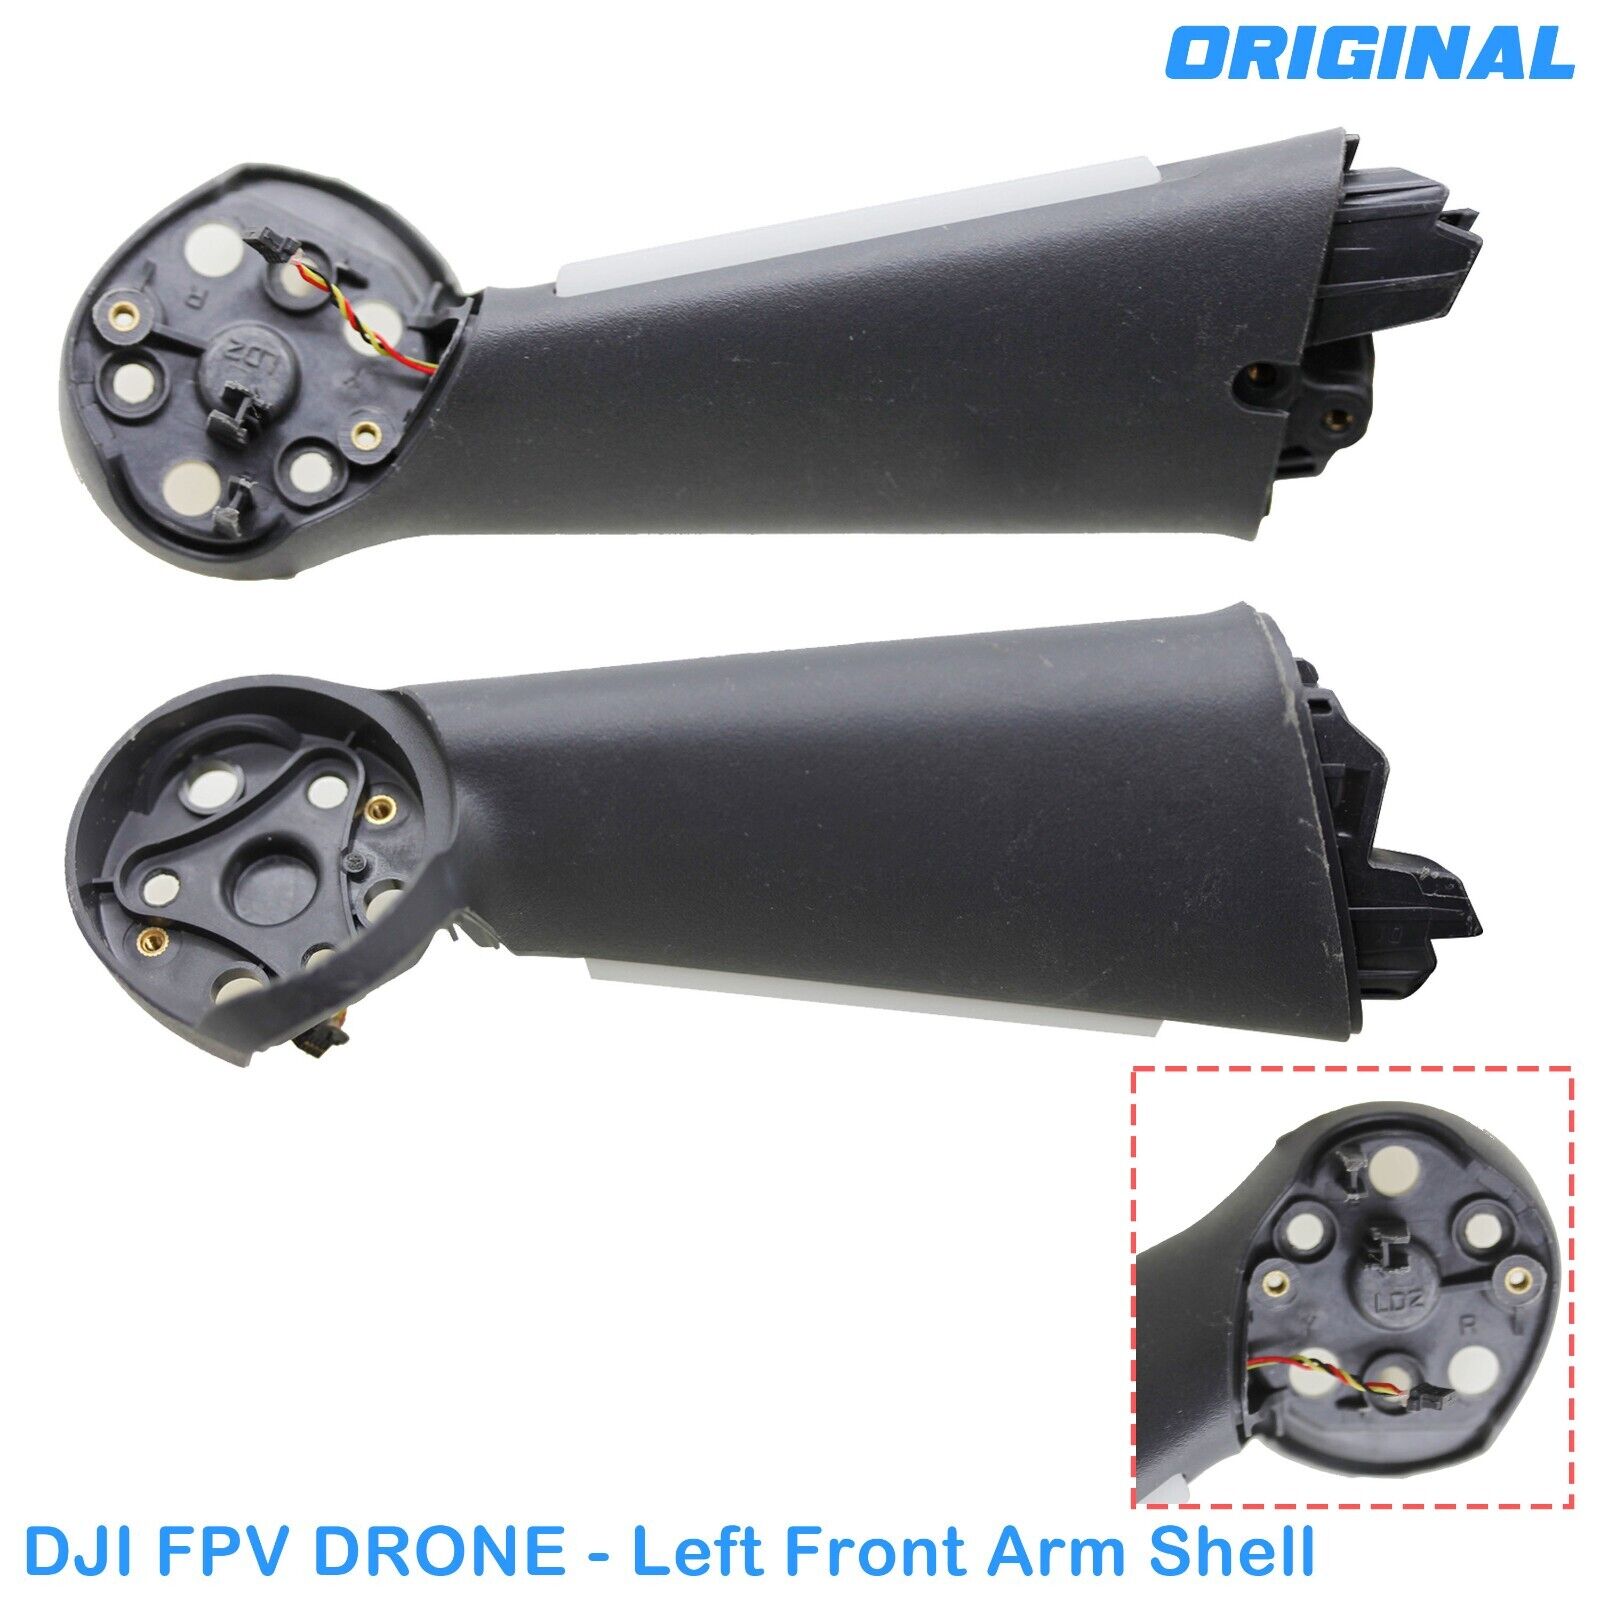 DJI FPV Drone Arm Shell Replacement